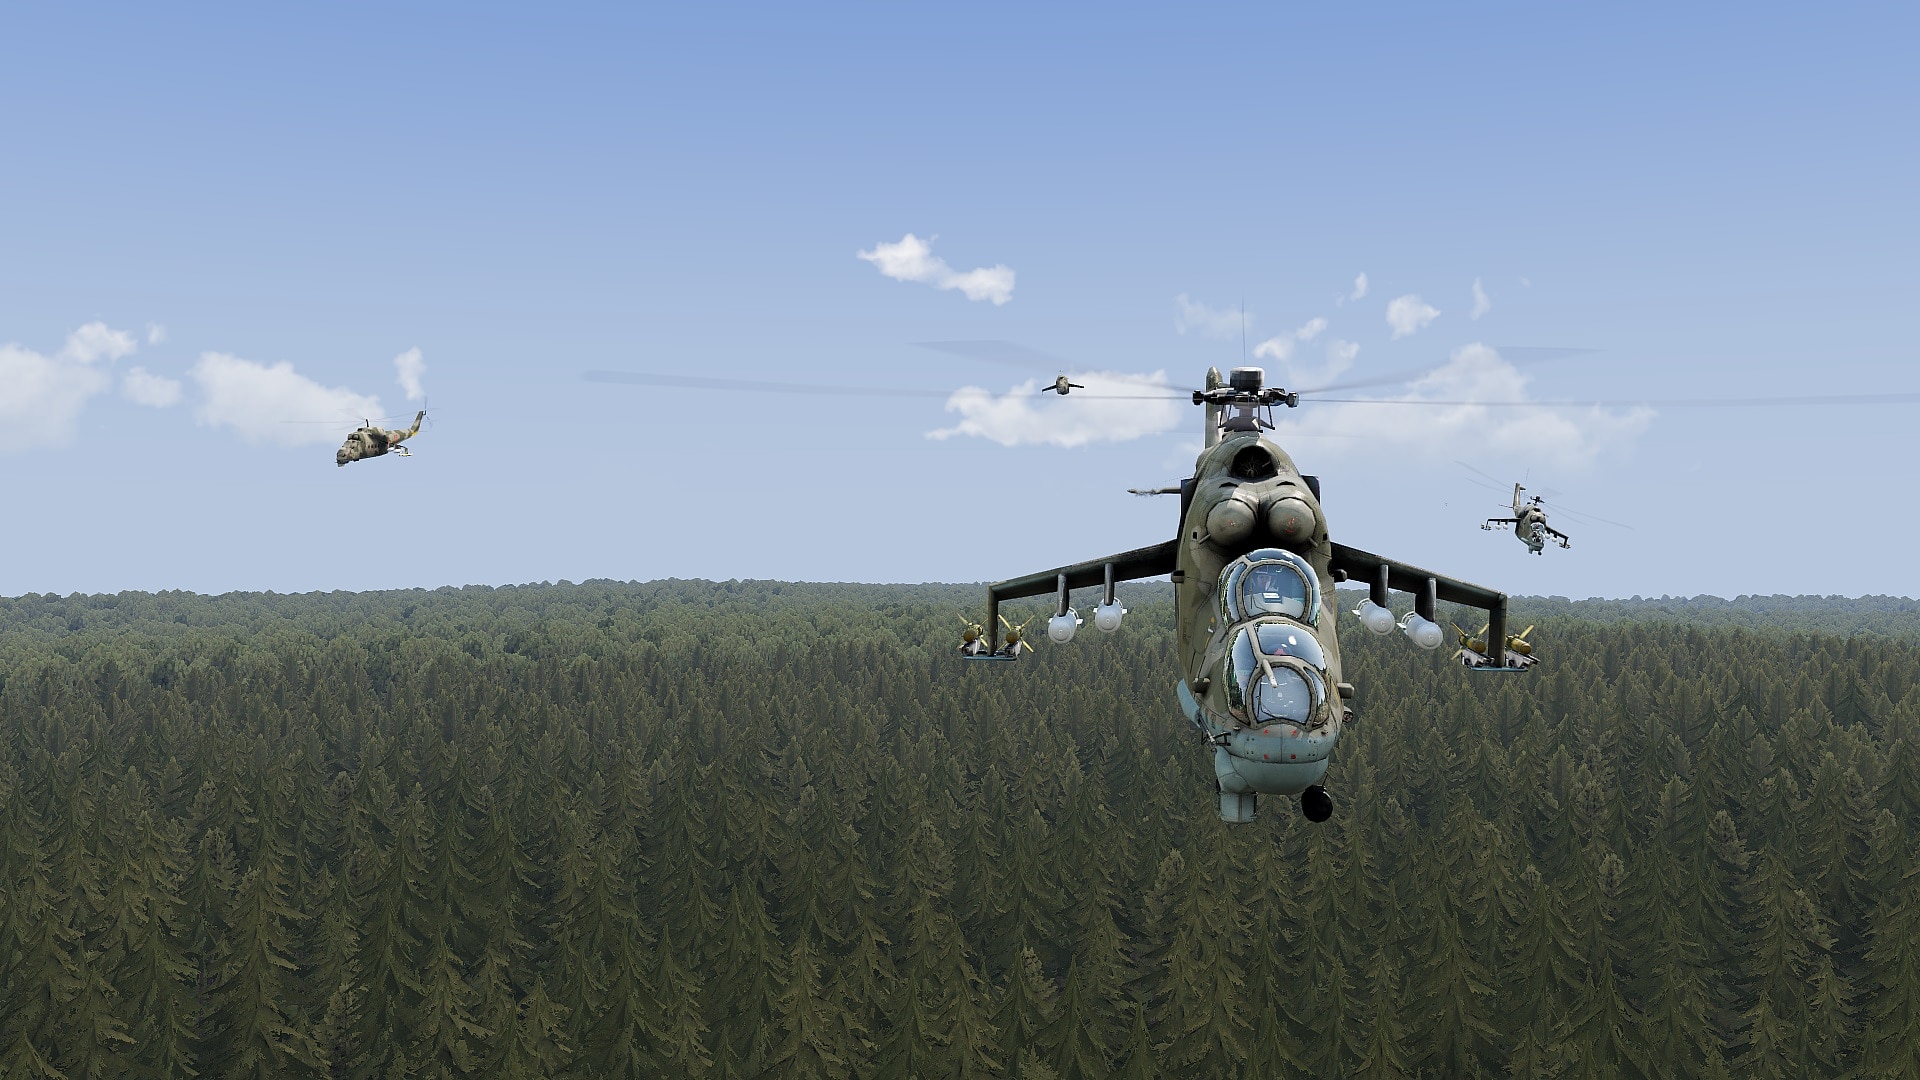 Helicopter will not land and load troops in multiplayer - ARMA 3 - MISSION  EDITING & SCRIPTING - Bohemia Interactive Forums